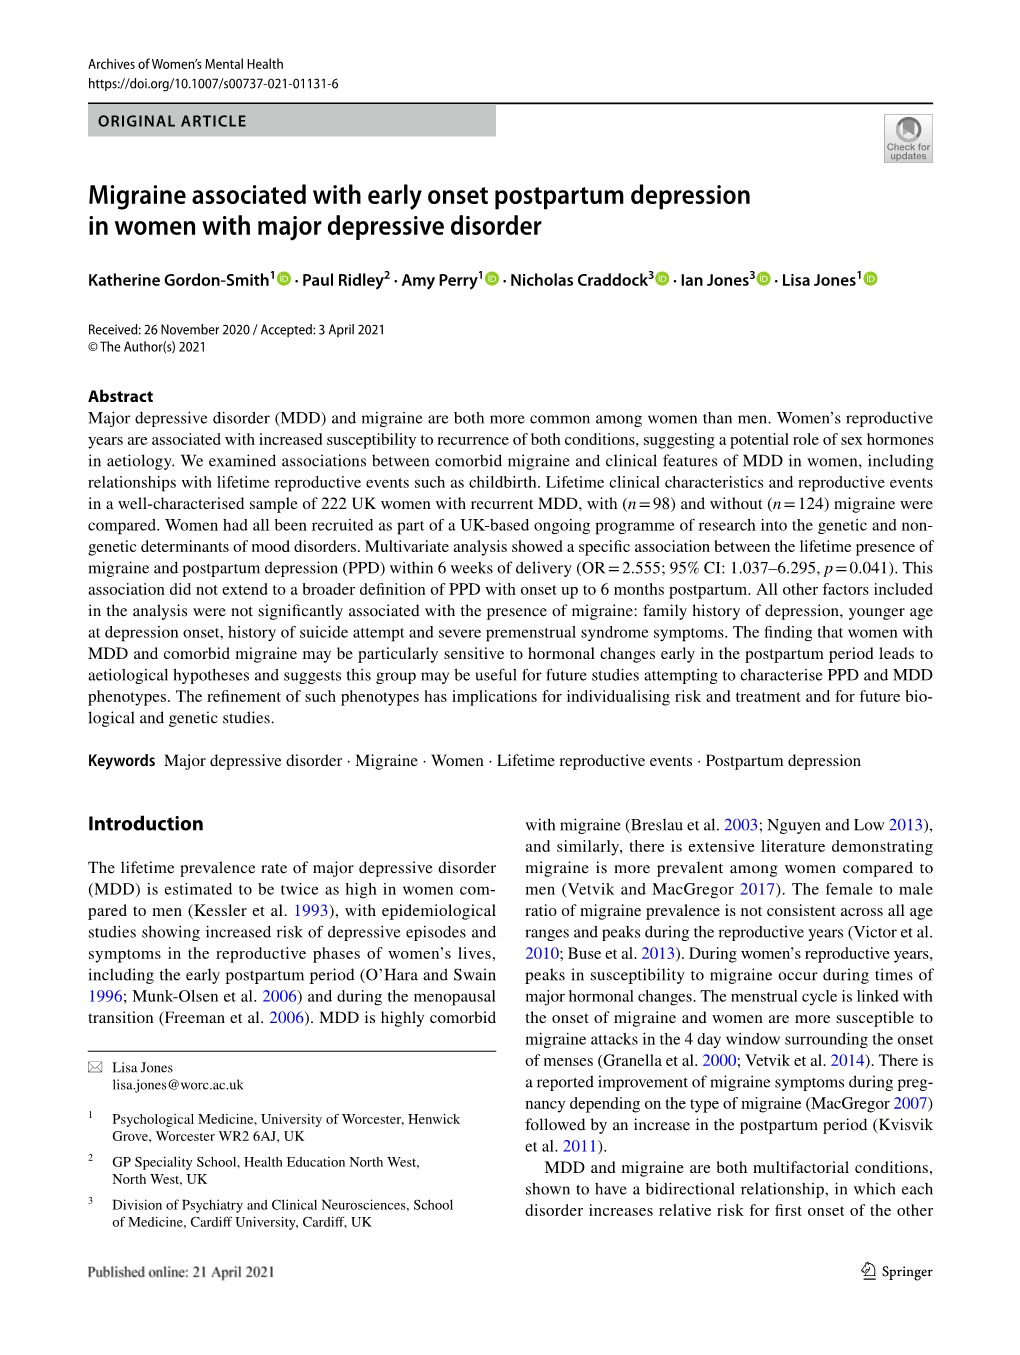 Migraine Associated with Early Onset Postpartum Depression in Women with Major Depressive Disorder